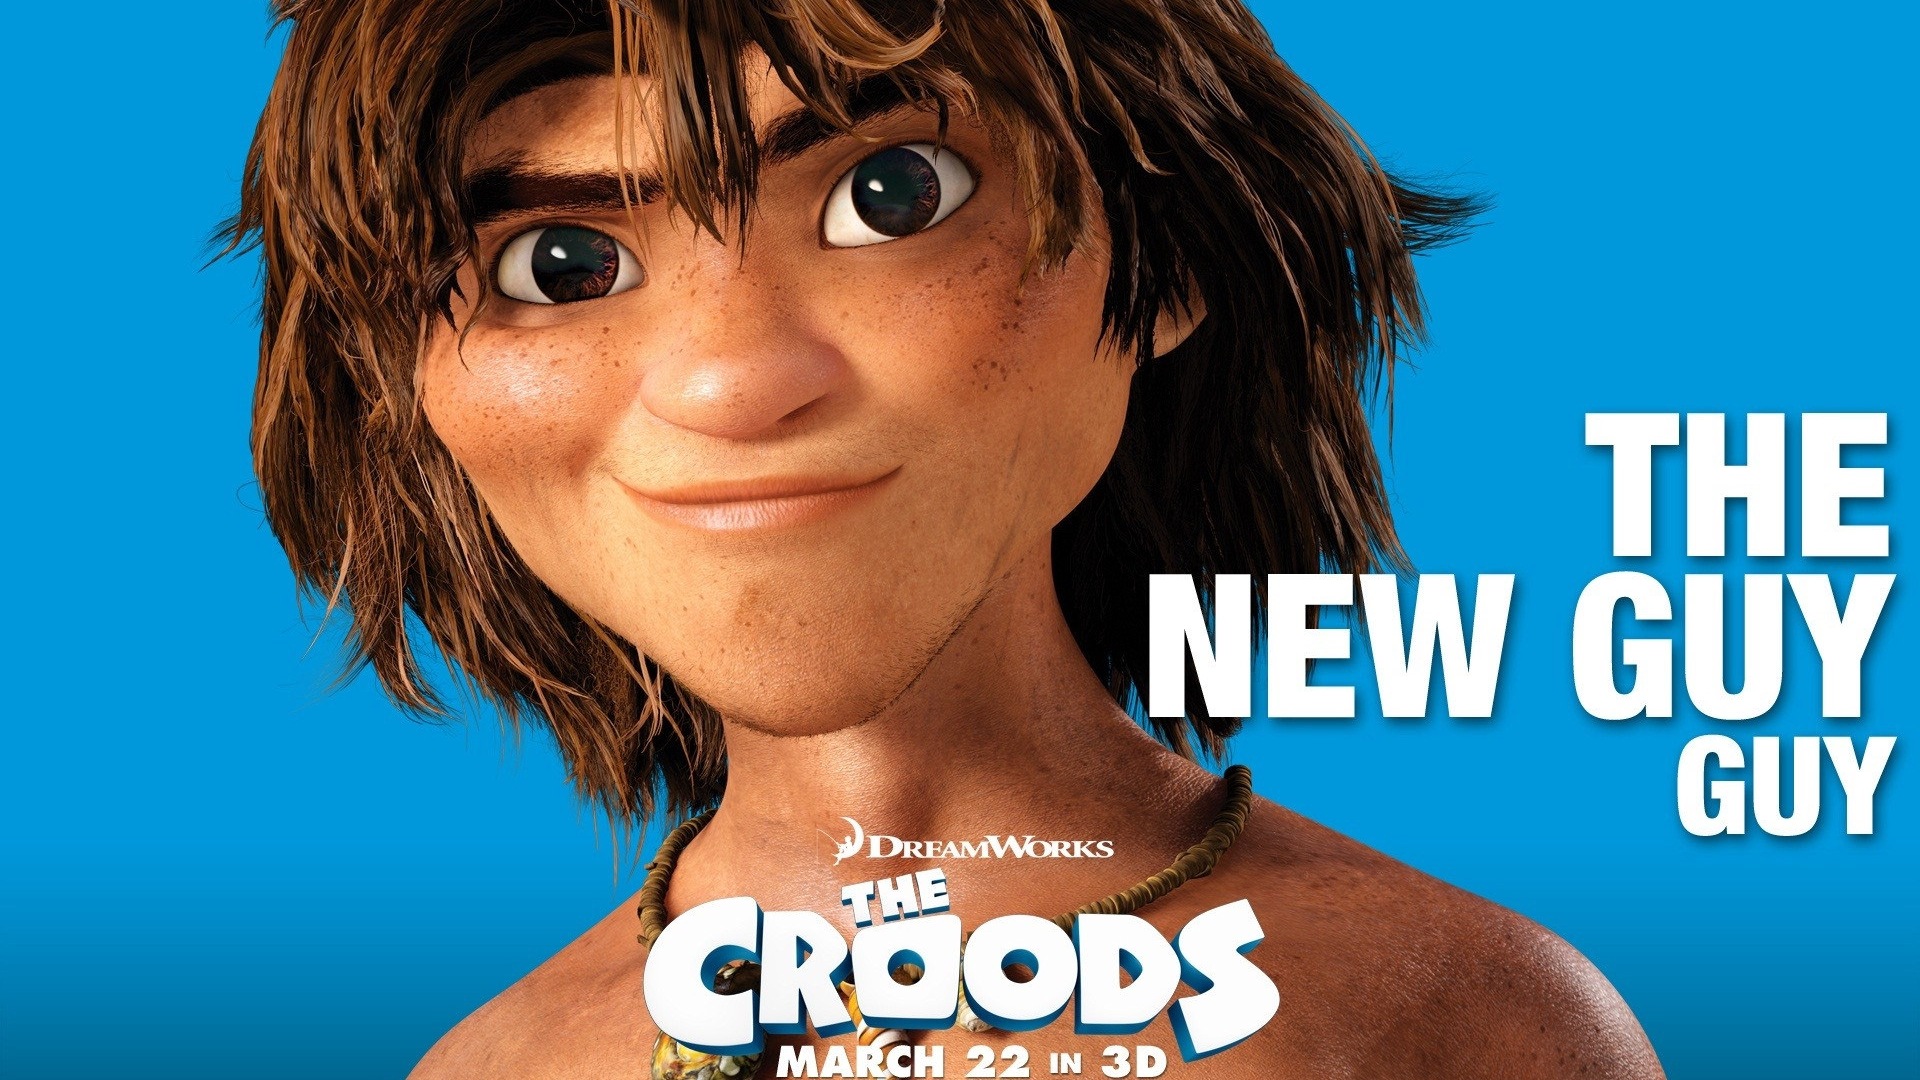 V Croods HD Movie Wallpapers #8 - 1920x1080